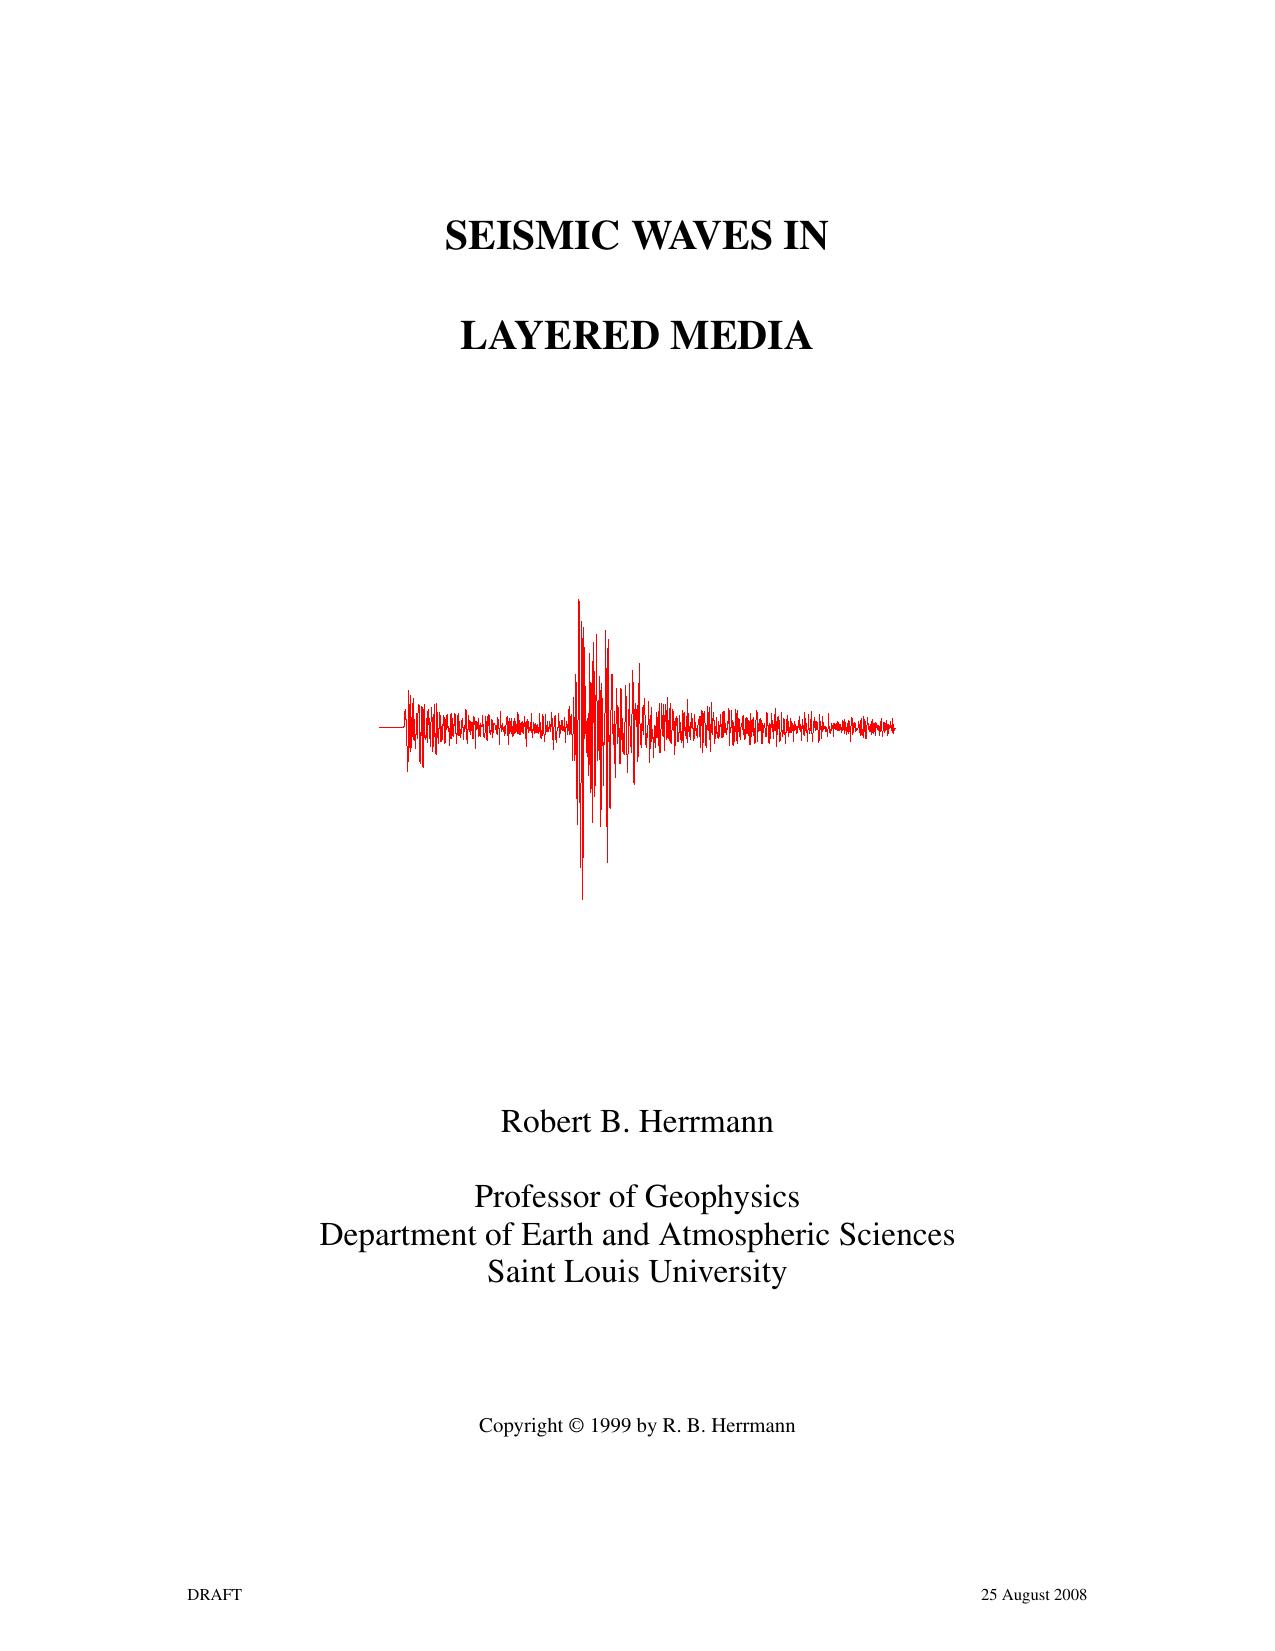 Seismic Waves in Layered Media"